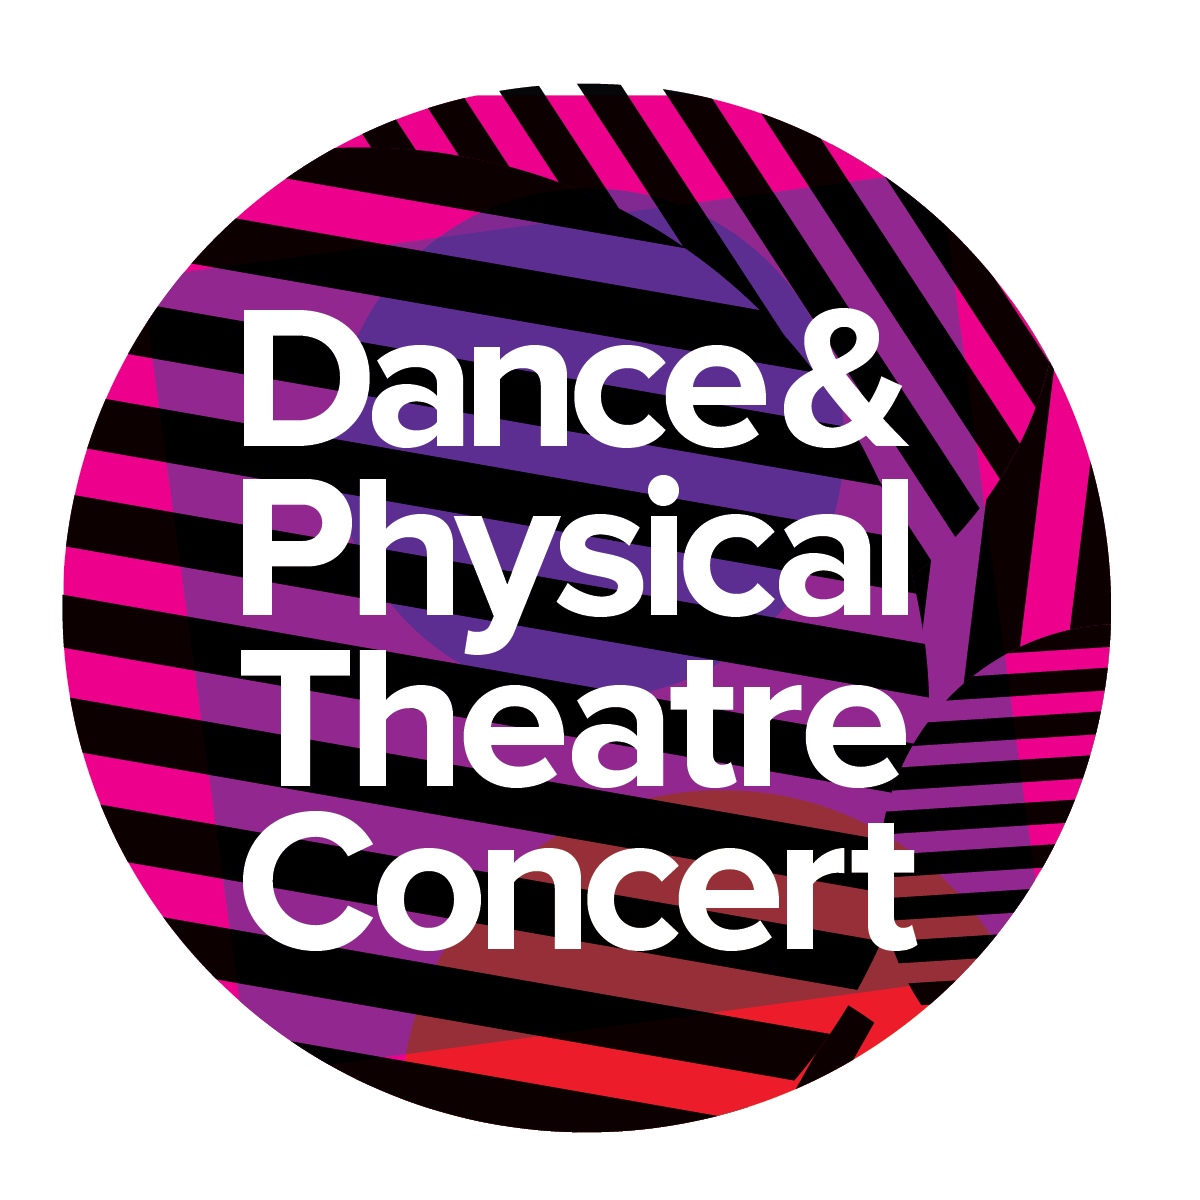 Dance and Physical Theatre Concert logo